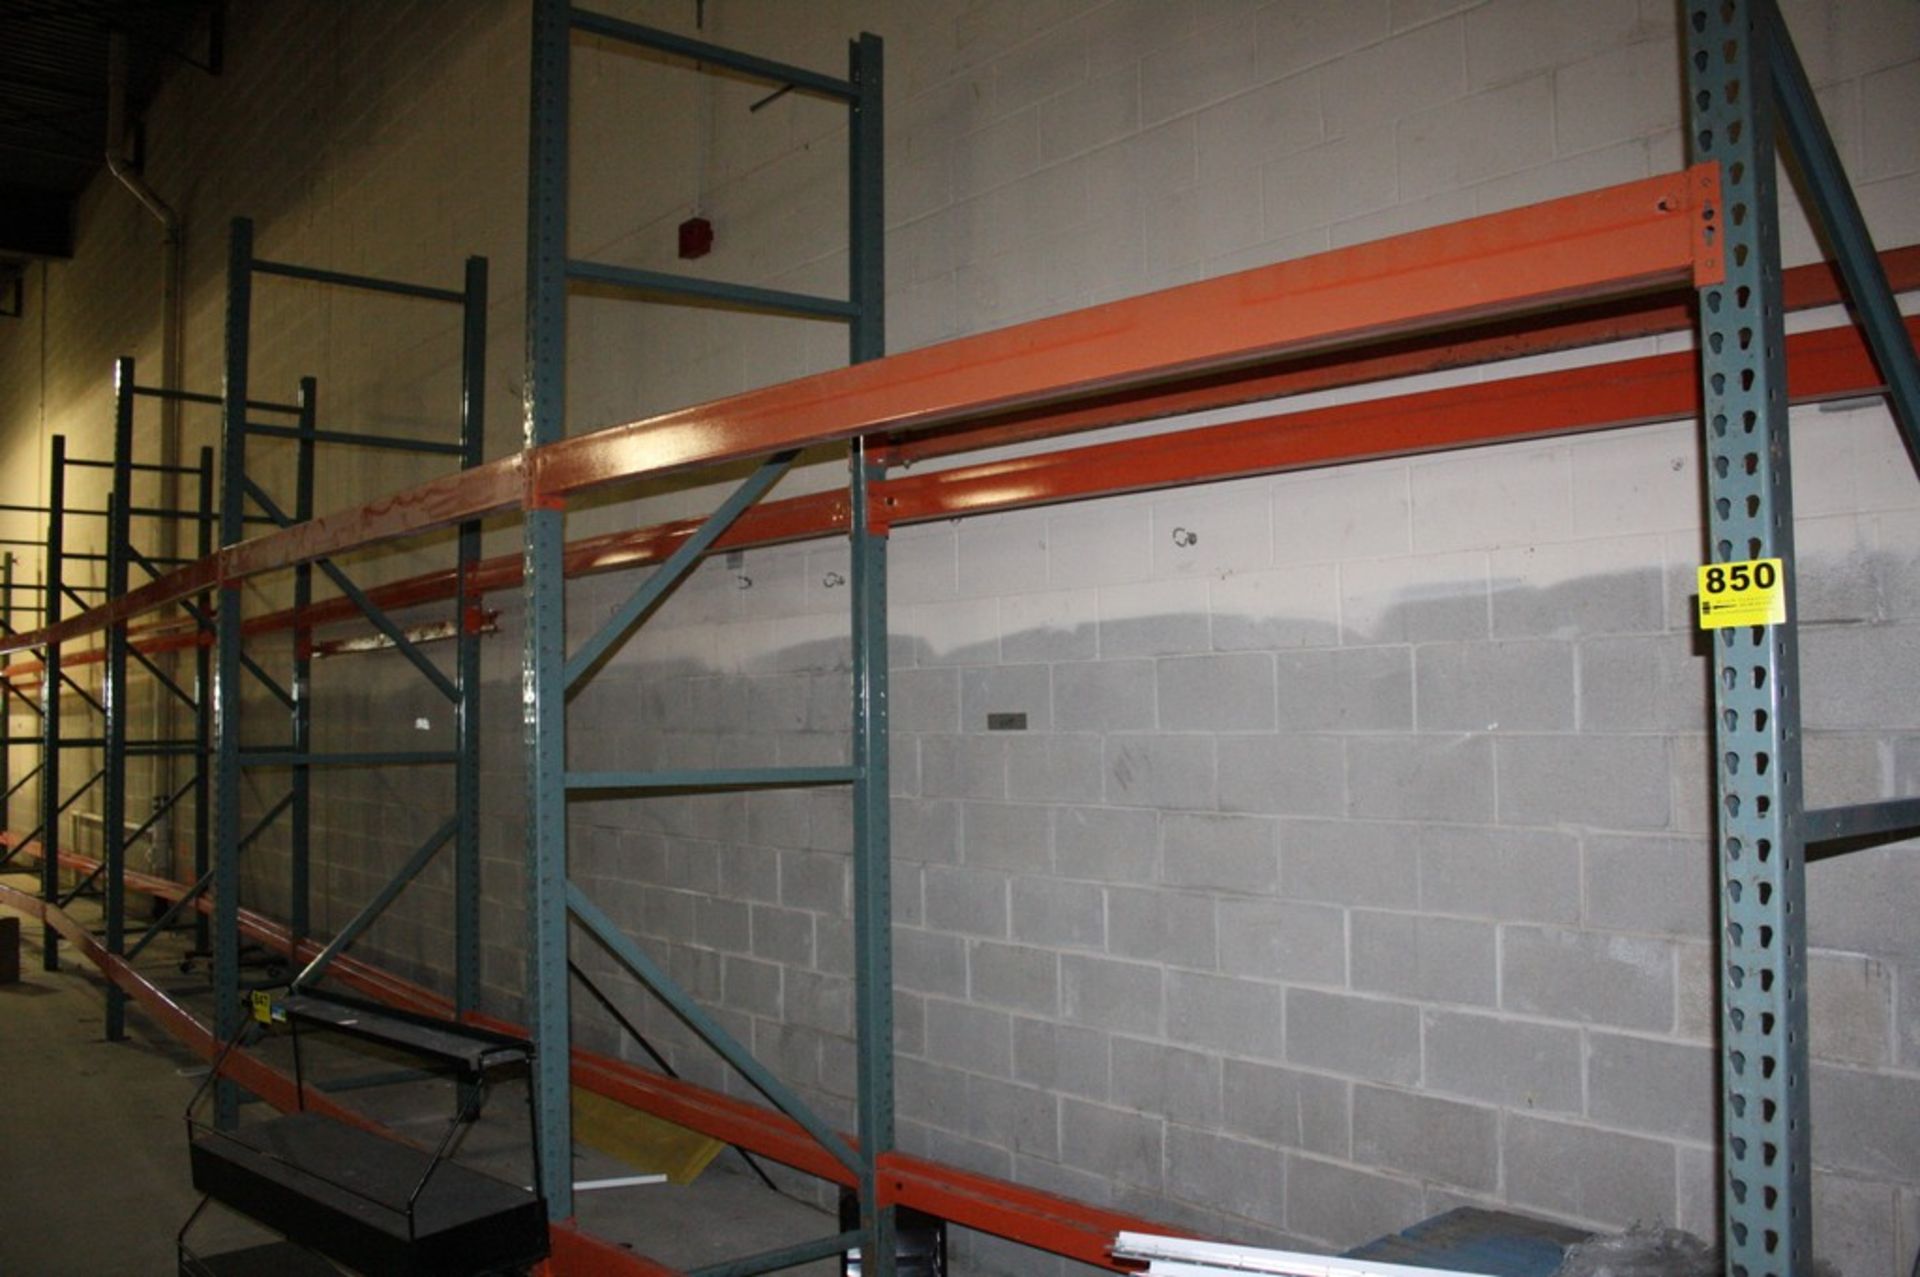 SECTIONS OF PALLET RACKING WITH (8) 12' X 42" UPRIGHTS AND (28) 9' CROSS BEAMS